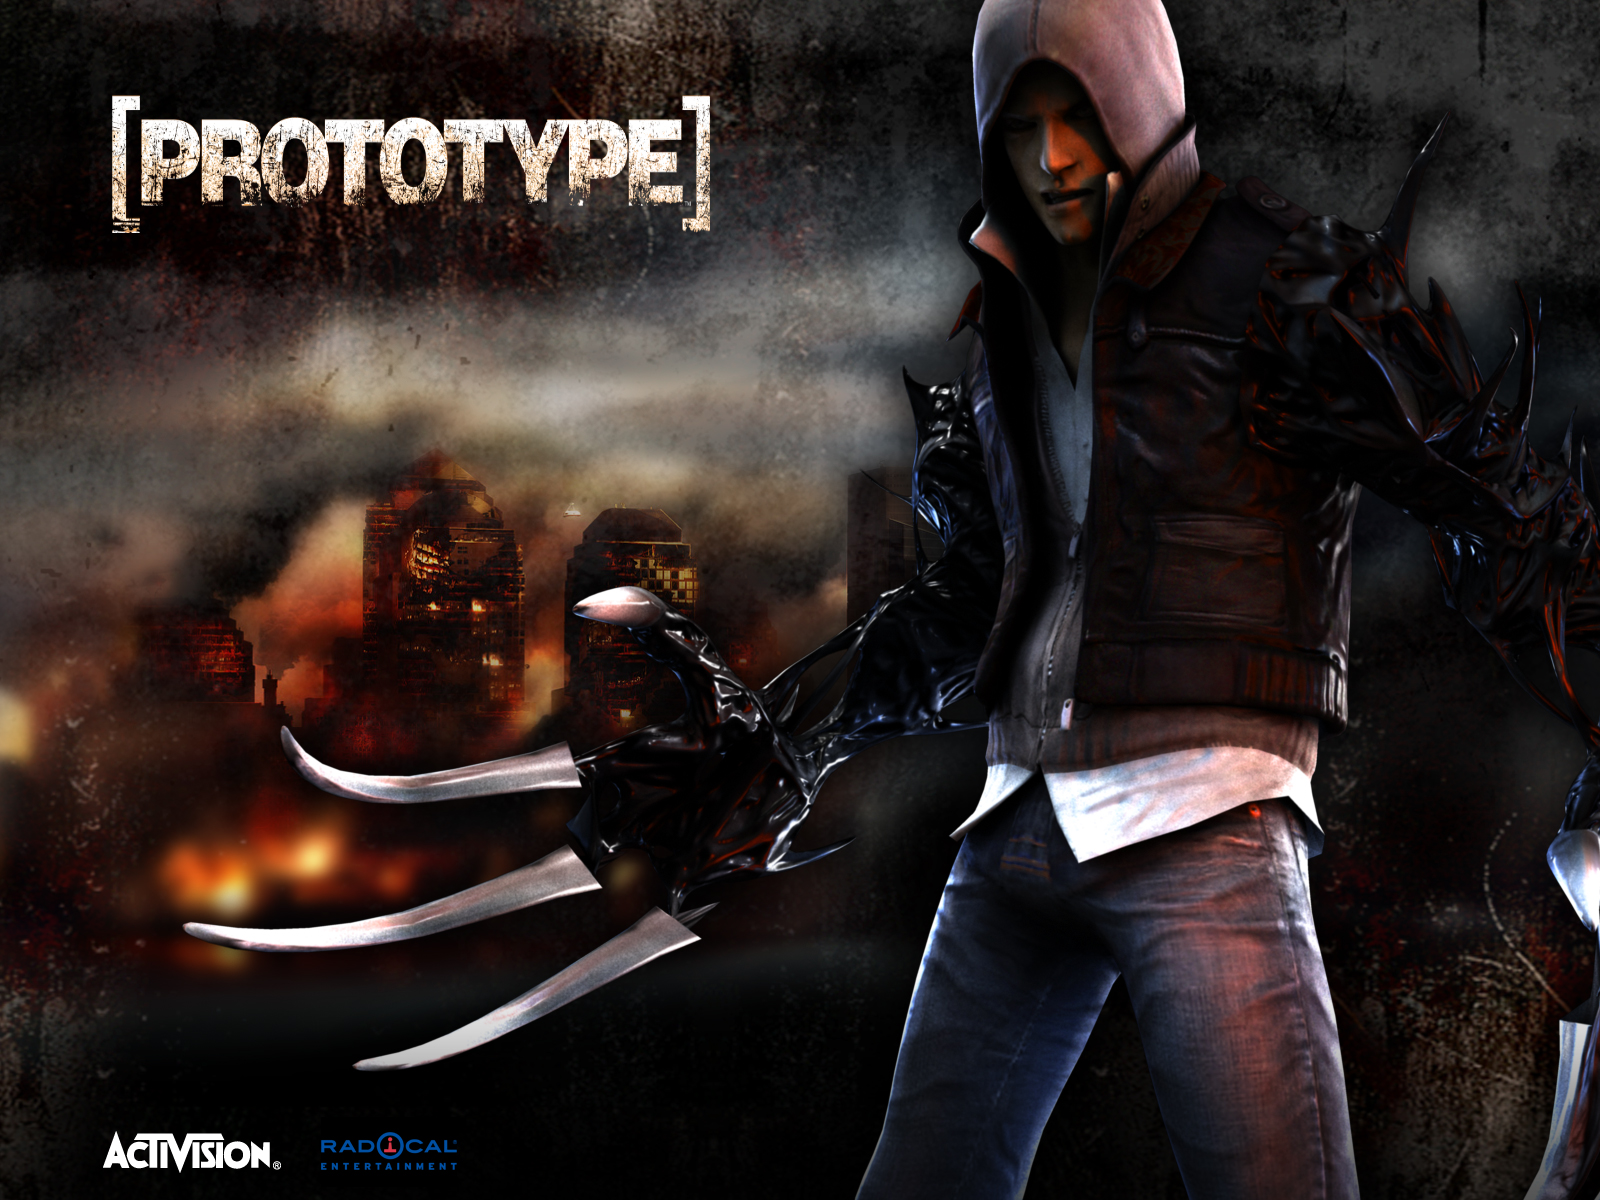 Download full size three-toed hand Prototype wallpaper / 1600x1200